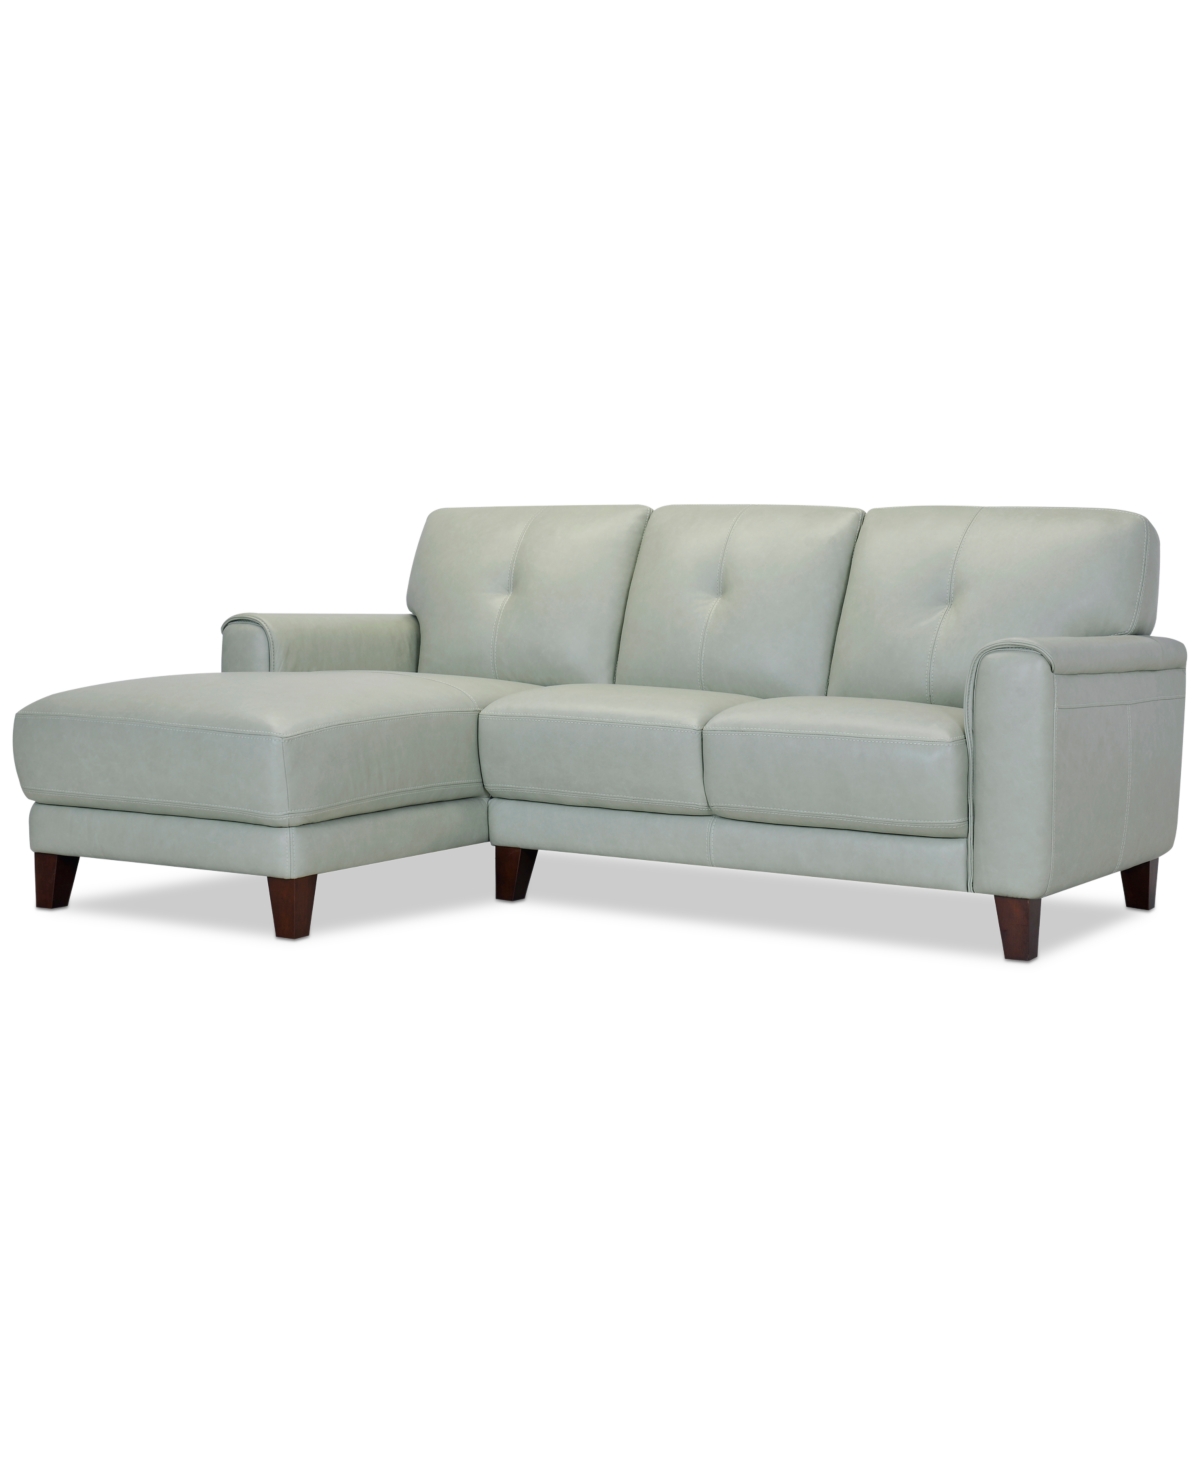 Macy's Ashlinn 86" 2-pc. Pastel Leather Sectional, Created For  In Mint Green